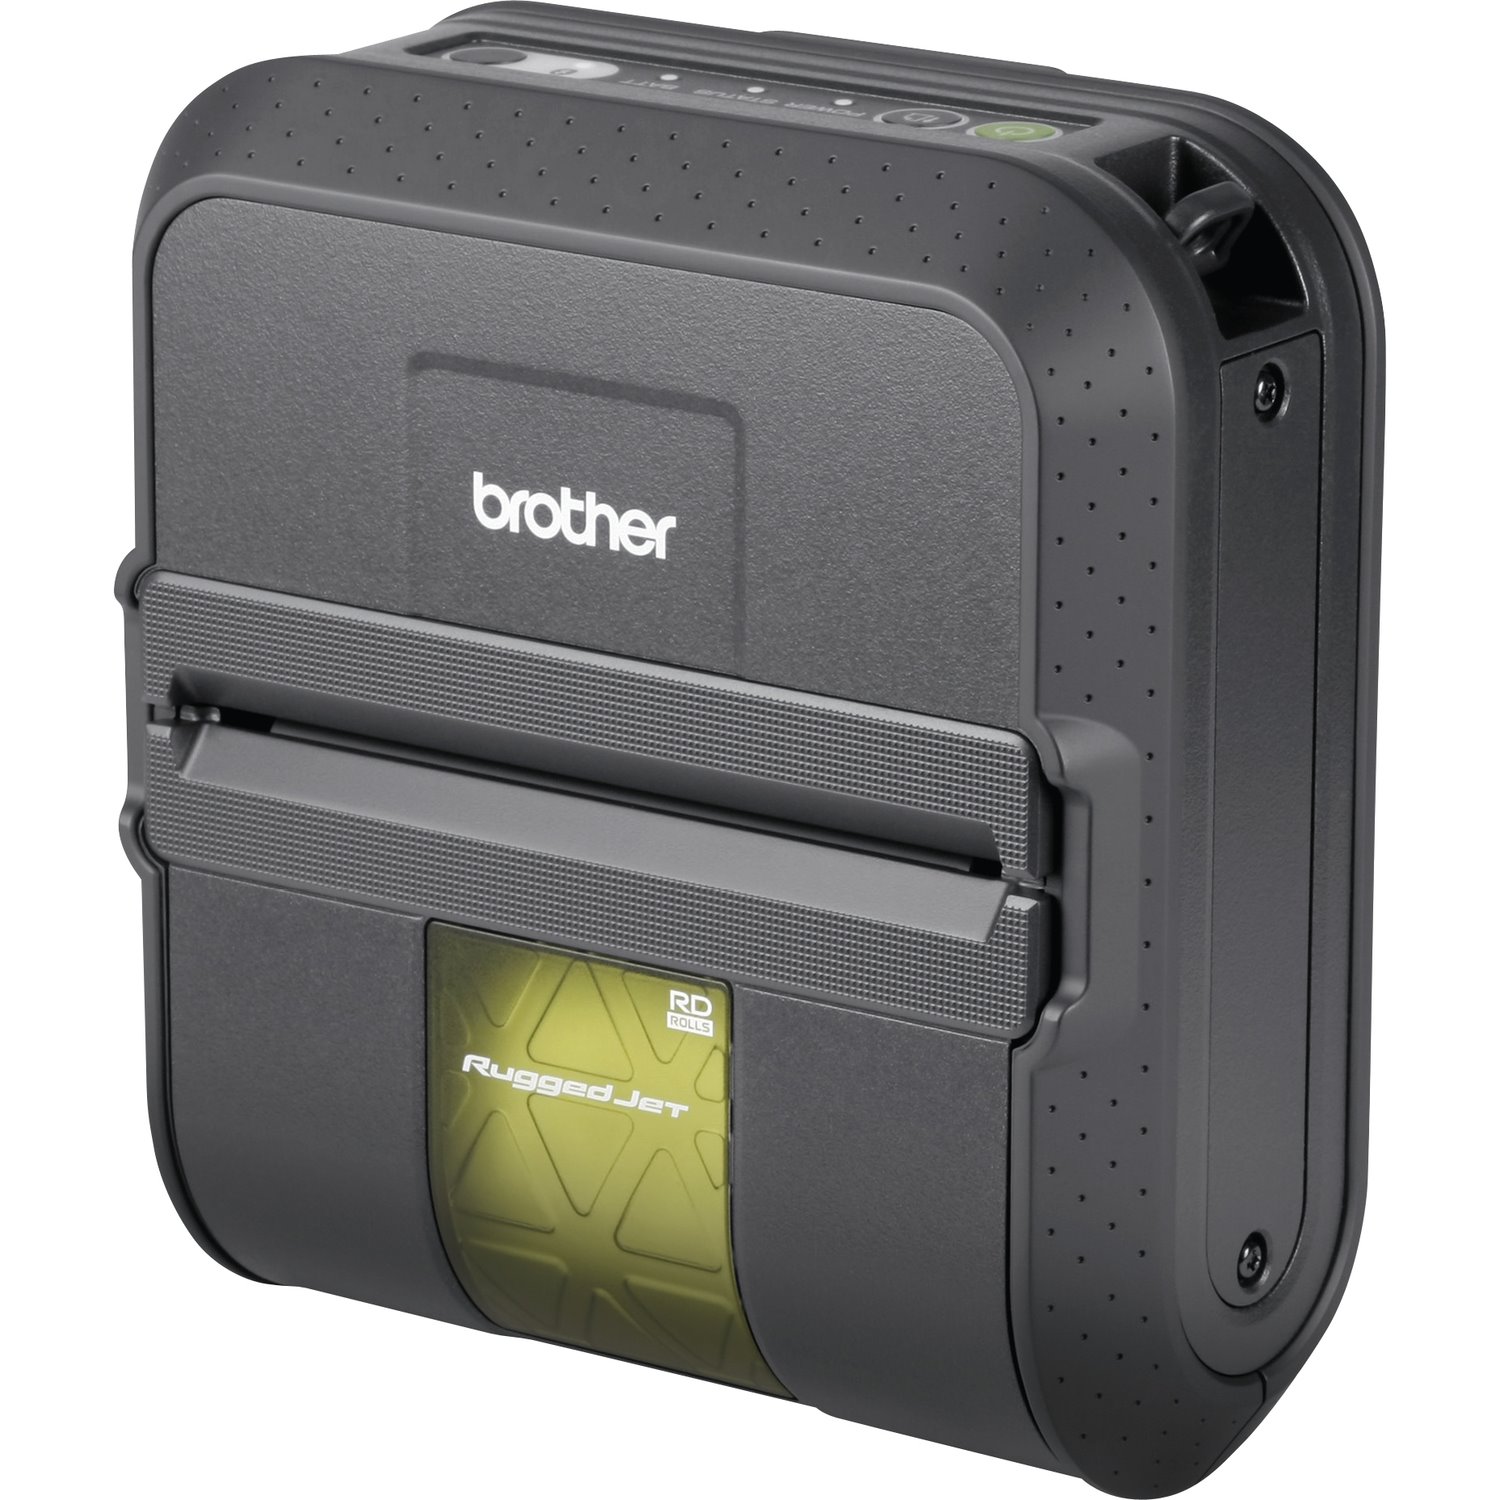 Brother RuggedJet RJ4040-K Direct Thermal Printer - Monochrome - Portable - Label Print - USB - Serial - Wireless LAN - Battery Included